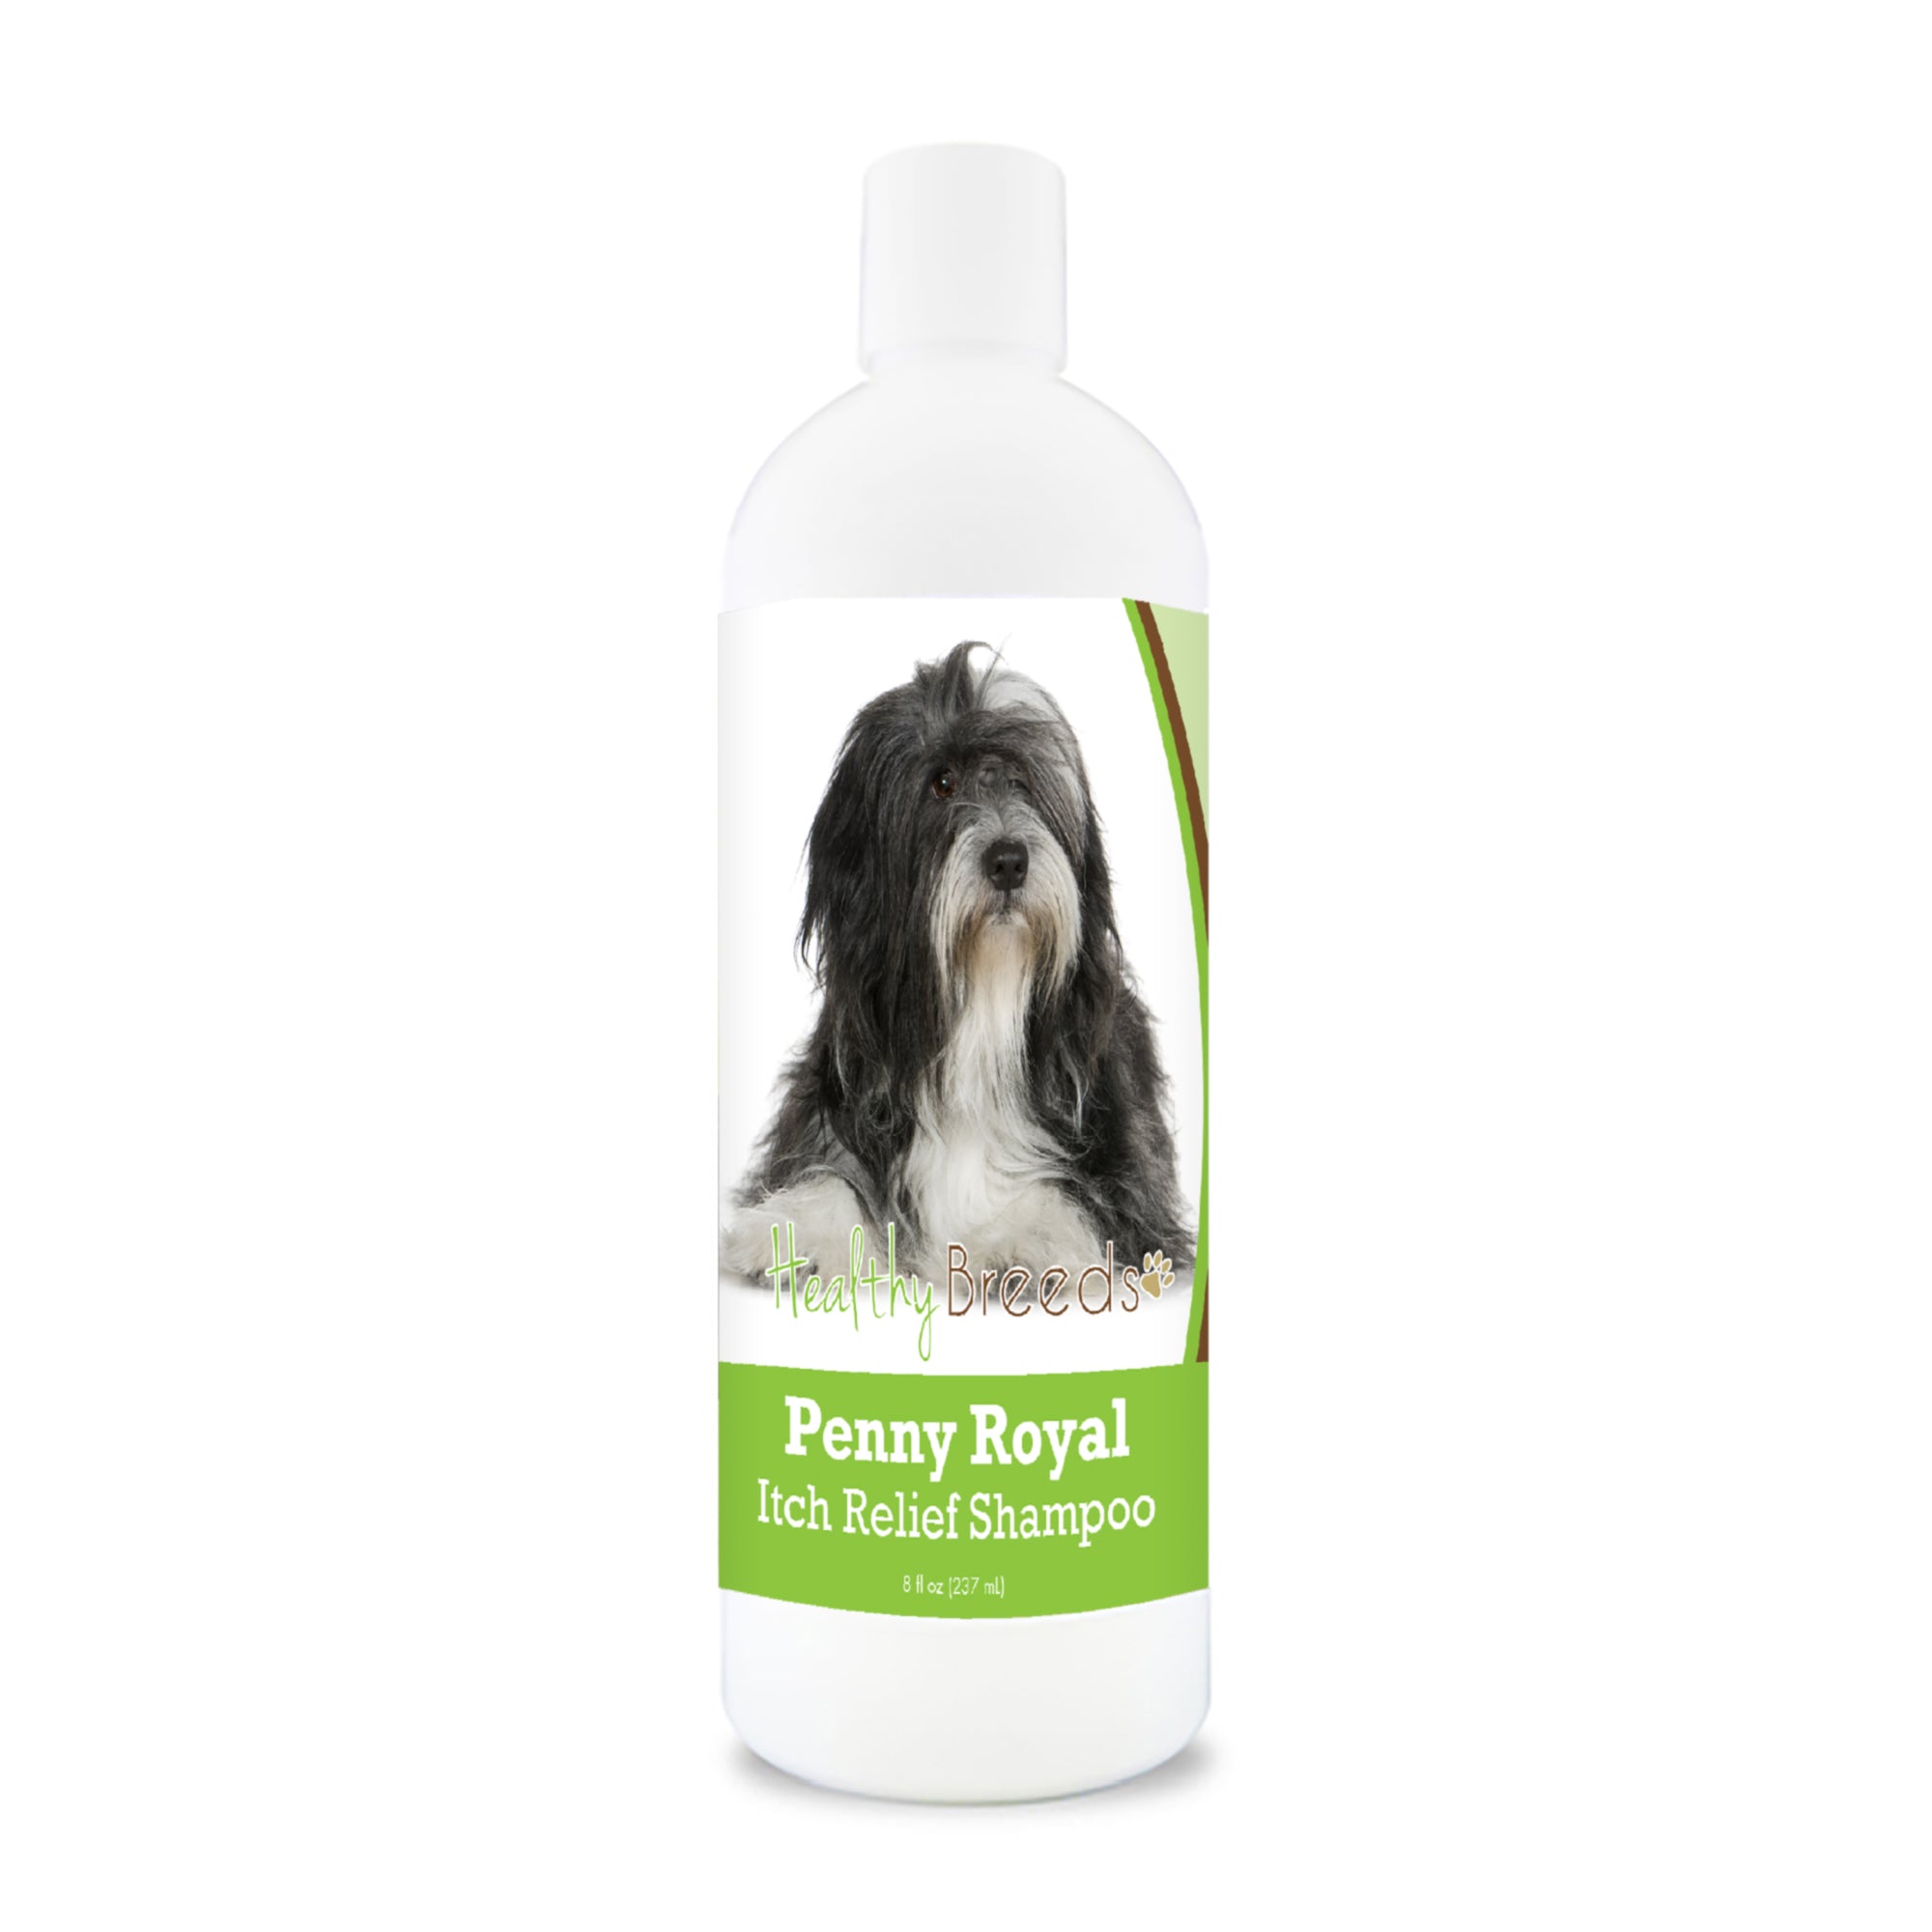 Lhasa Apso Penny Royal Itch Relief Shampoo 8 oz